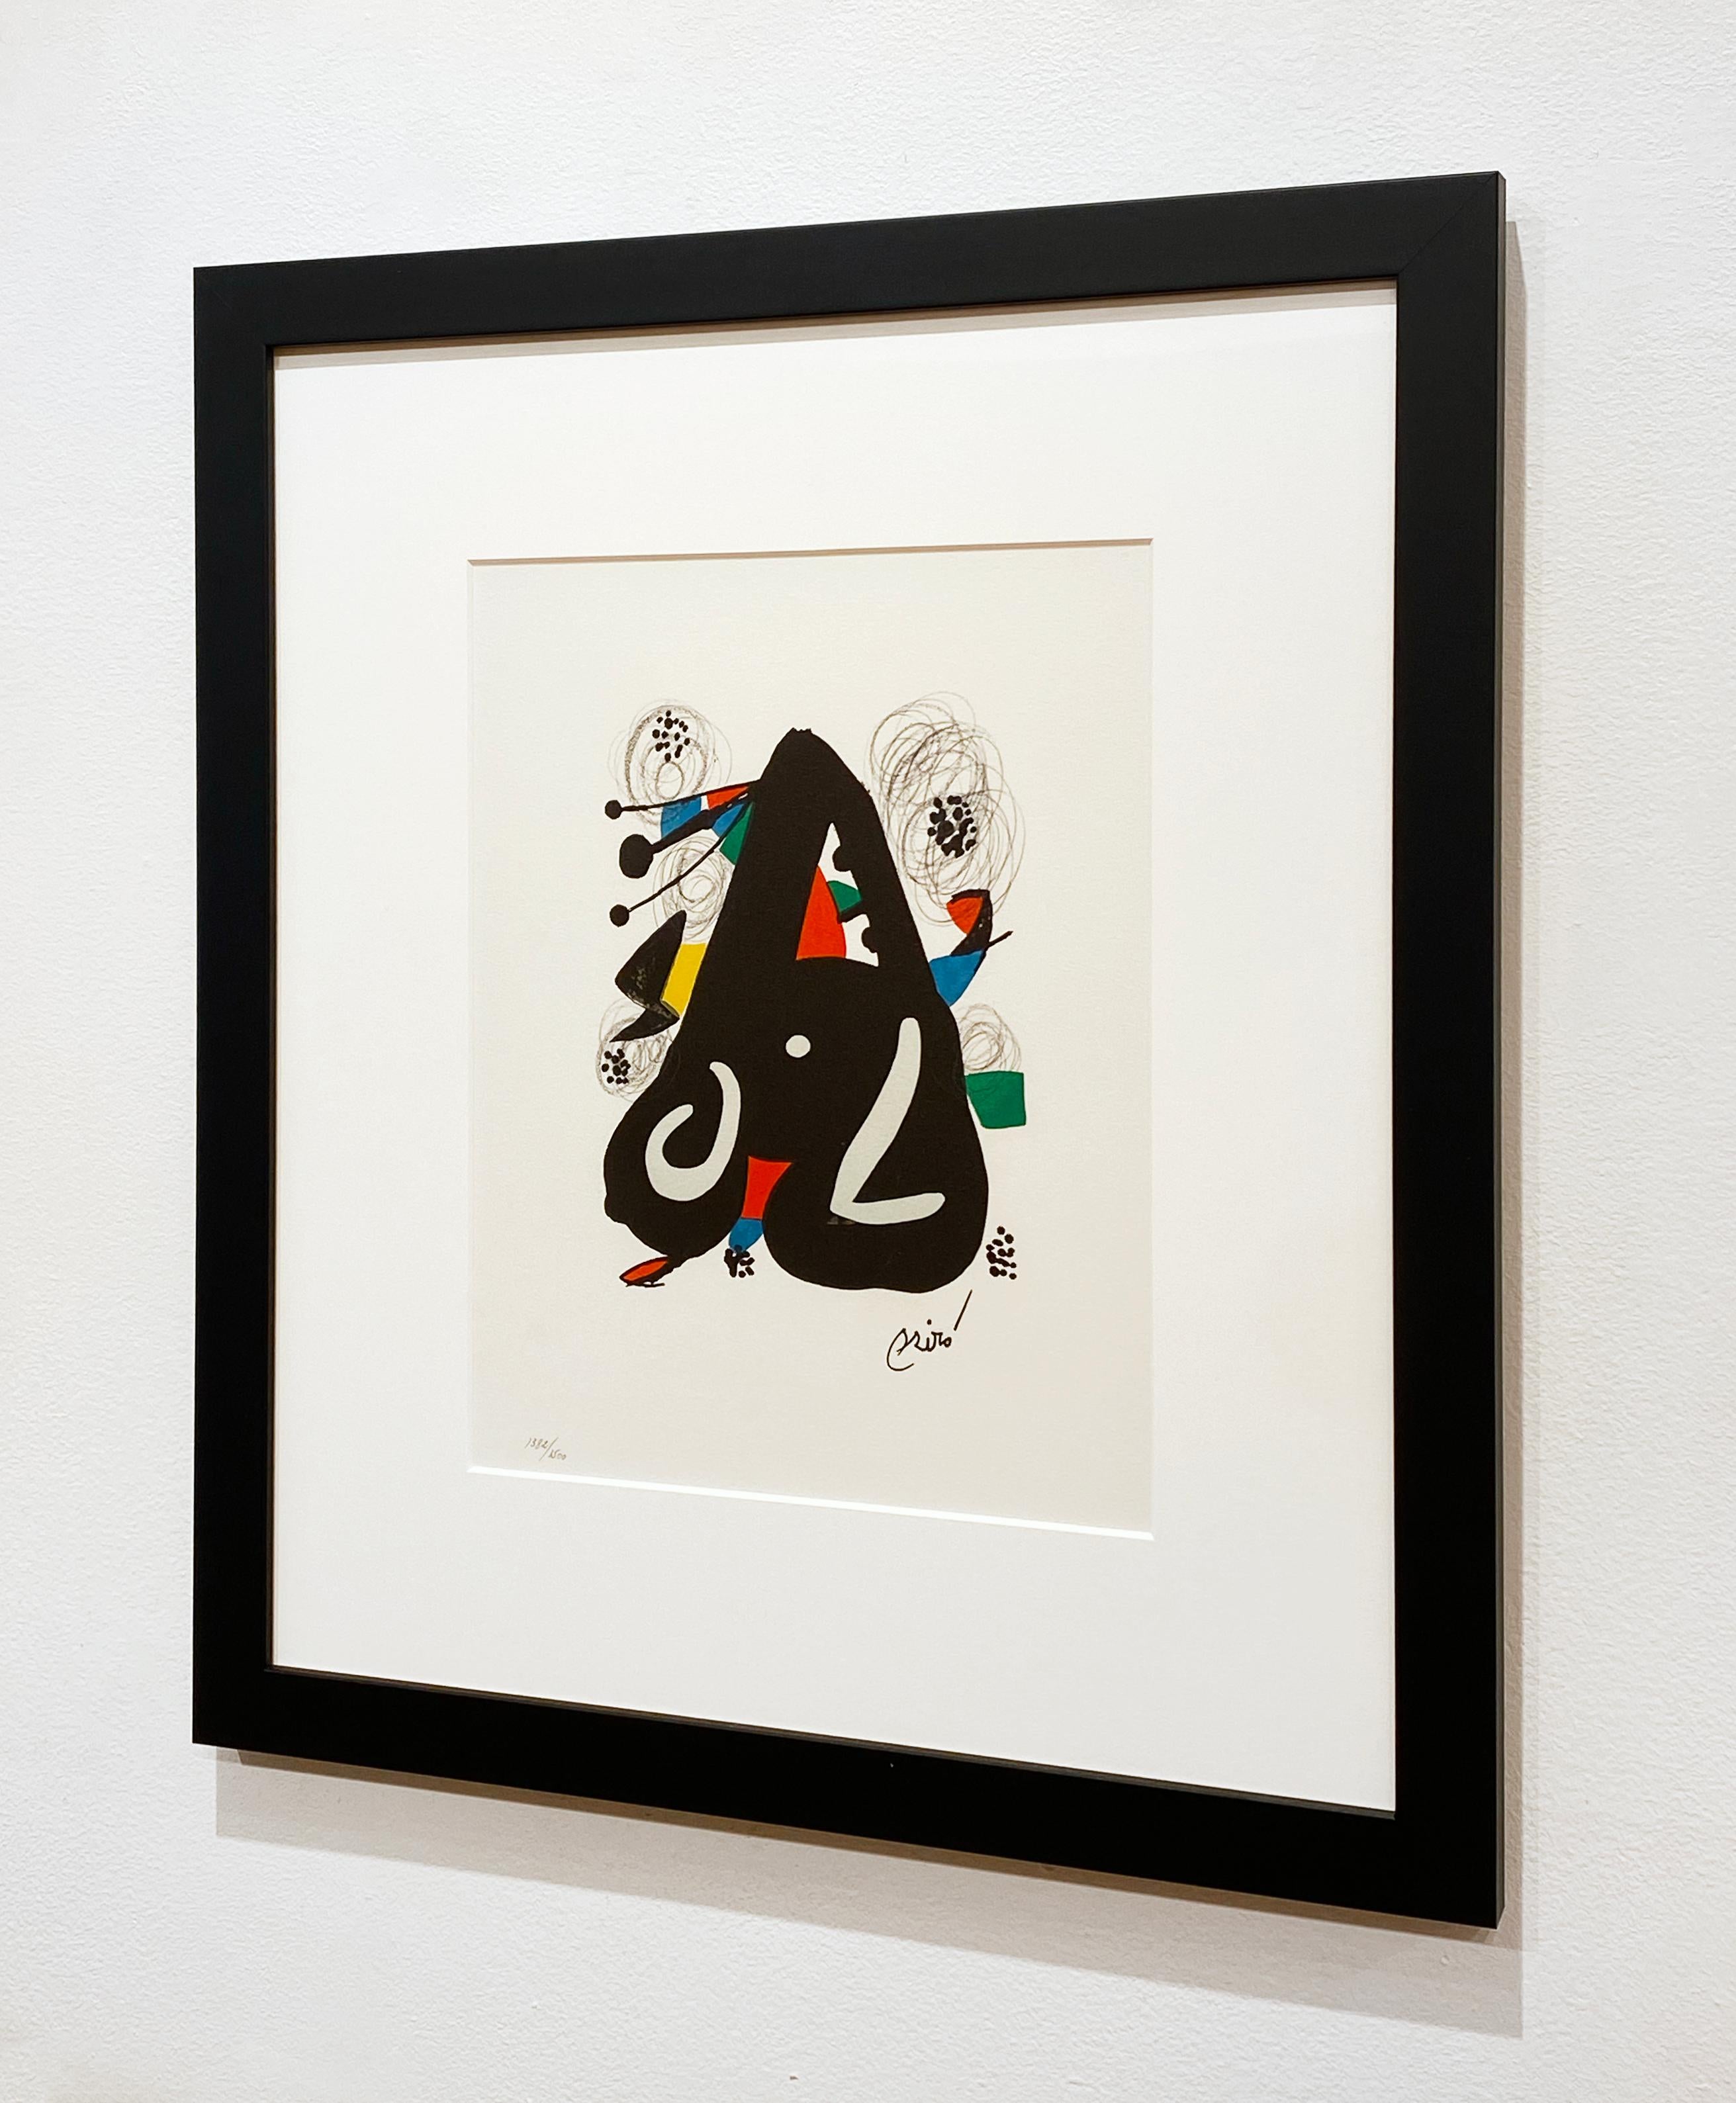 Artist:  Miro, Joan
Title:  La Melodie Acide 1220
Series:  Acid Melody
Date:  1980
Medium:  Lithograph
Unframed Dimensions:  13